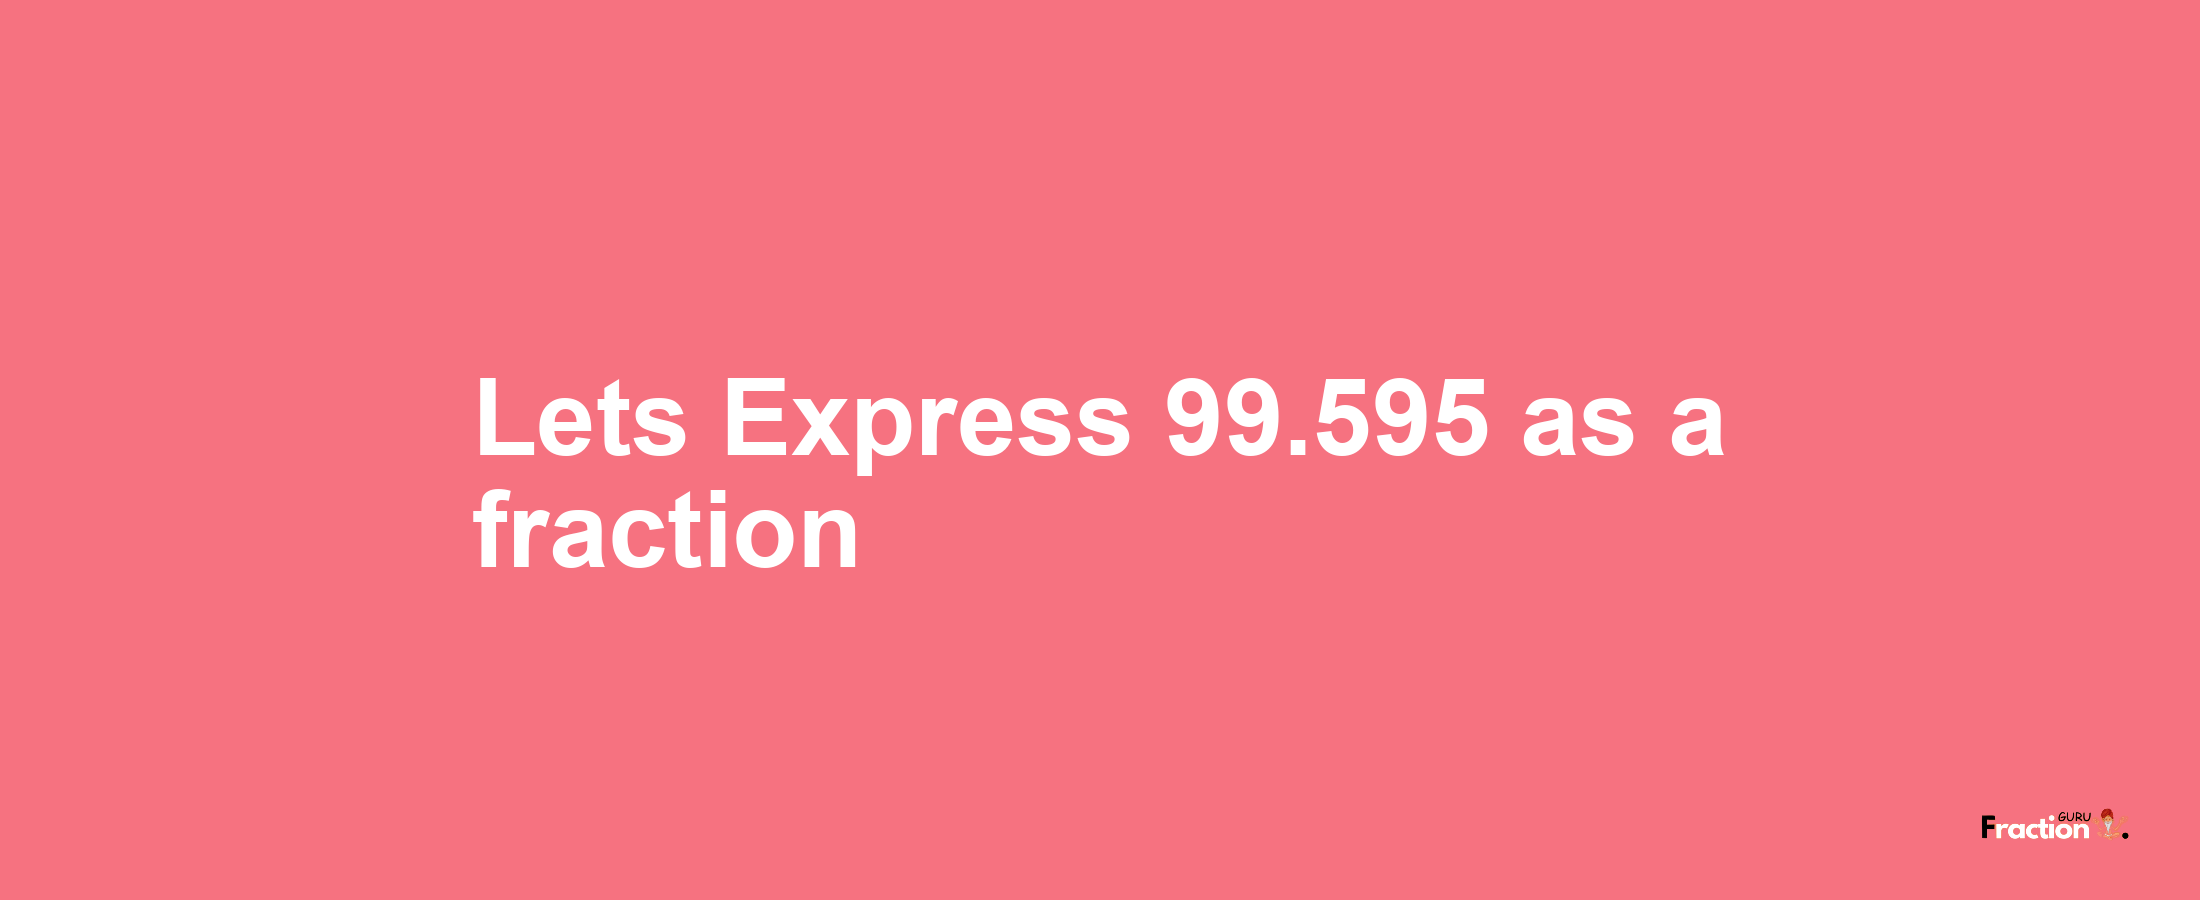 Lets Express 99.595 as afraction